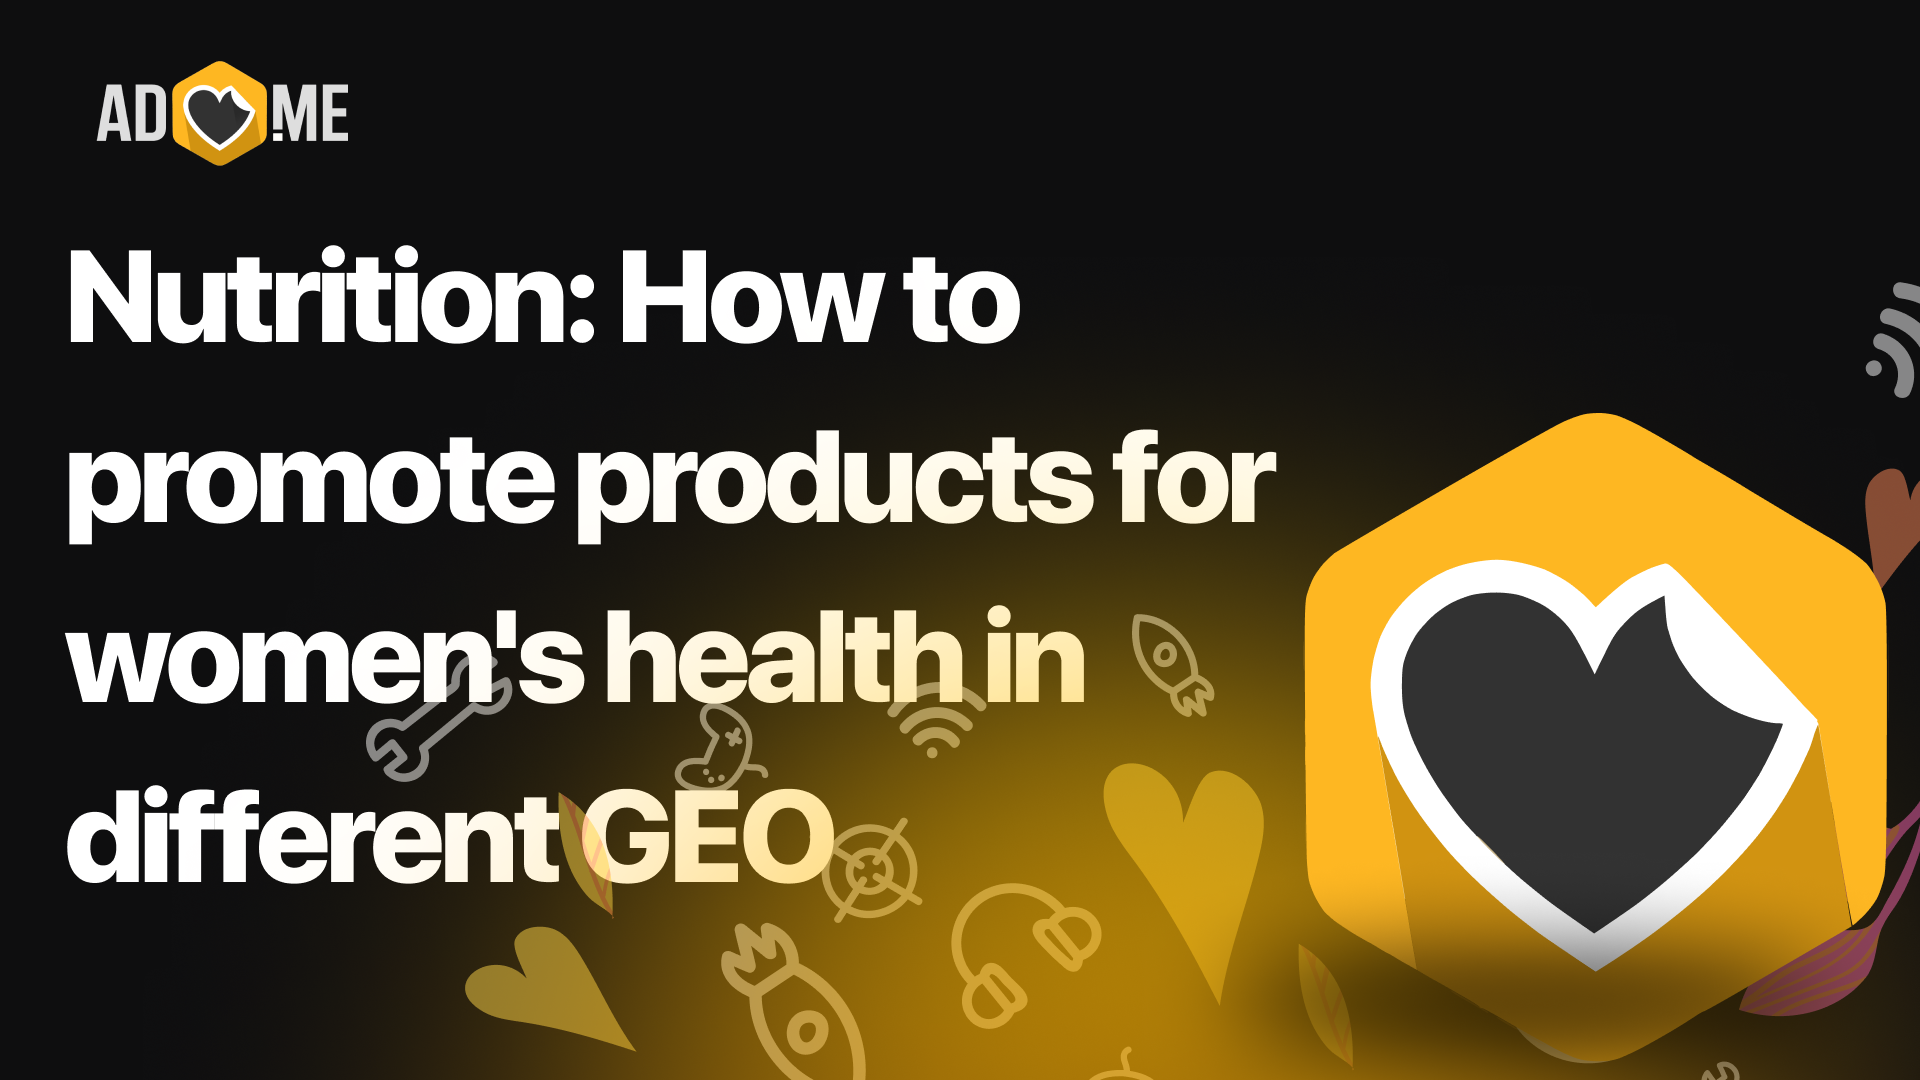 Nutrition: How to promote products for women's health in different GEOs